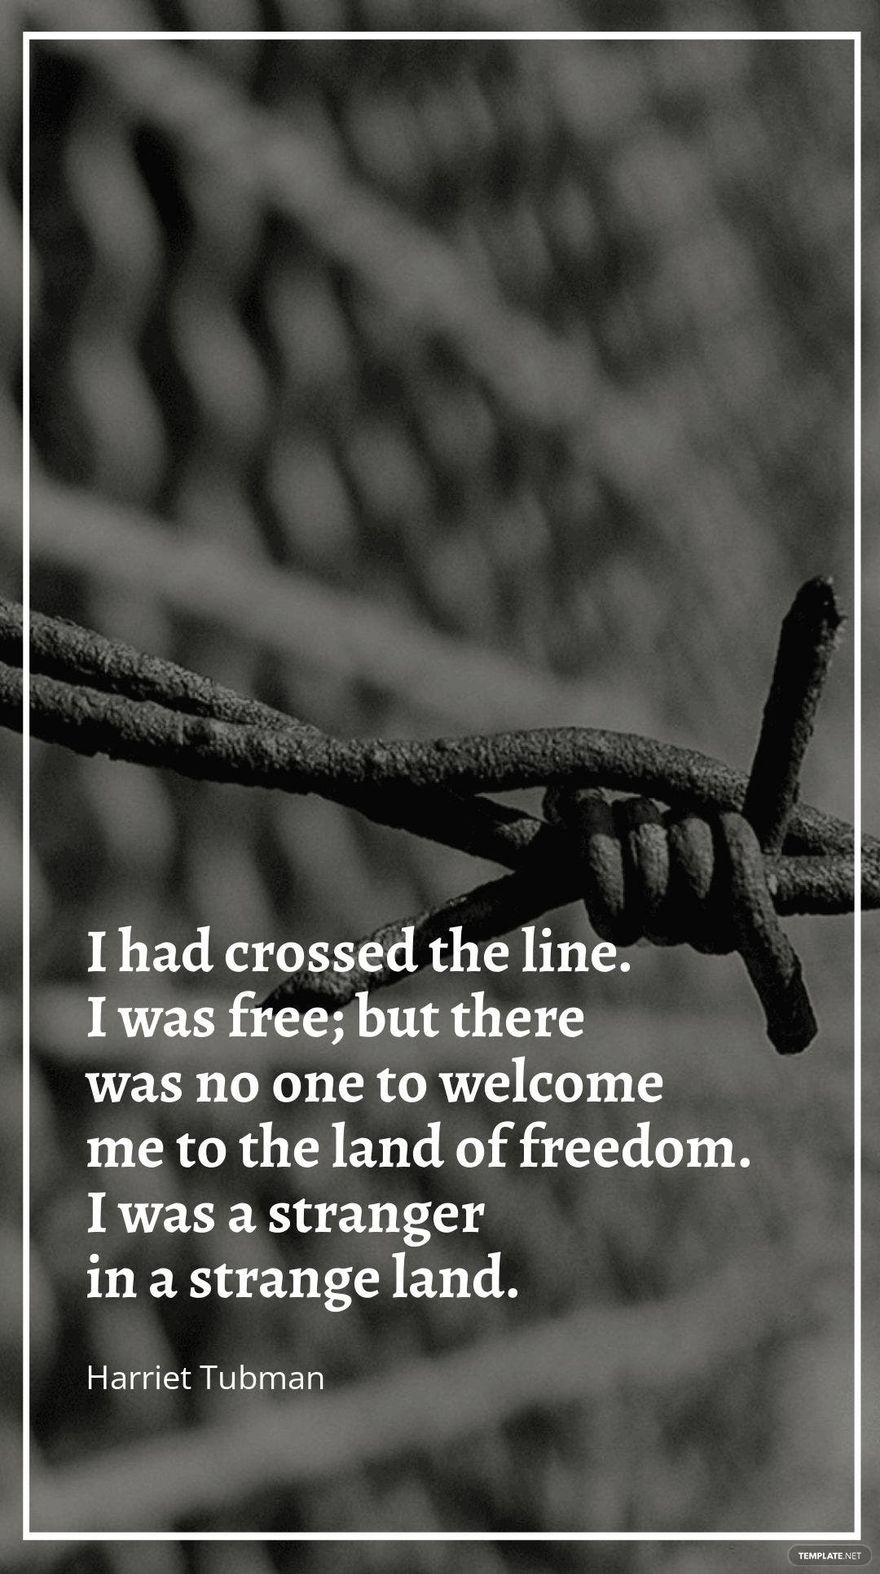 Harriet Tubman - I had crossed the line. I was free; but there was no one to welcome me to the land of freedom. I was a stranger in a strange land.